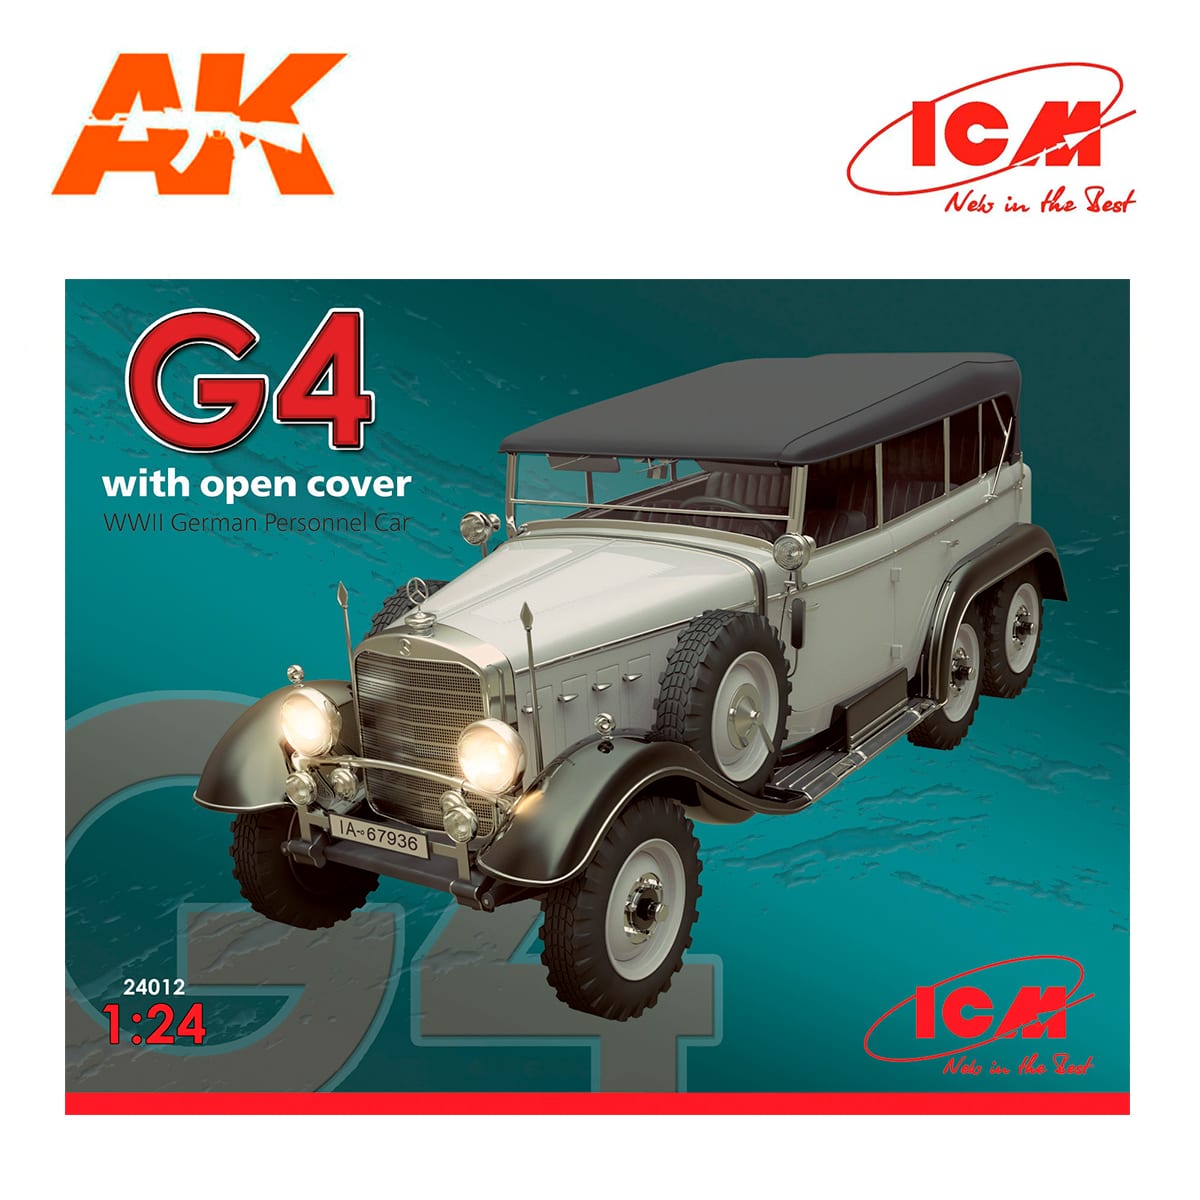 Typ G4 with open cover, WWII German Personnel Car 1/24